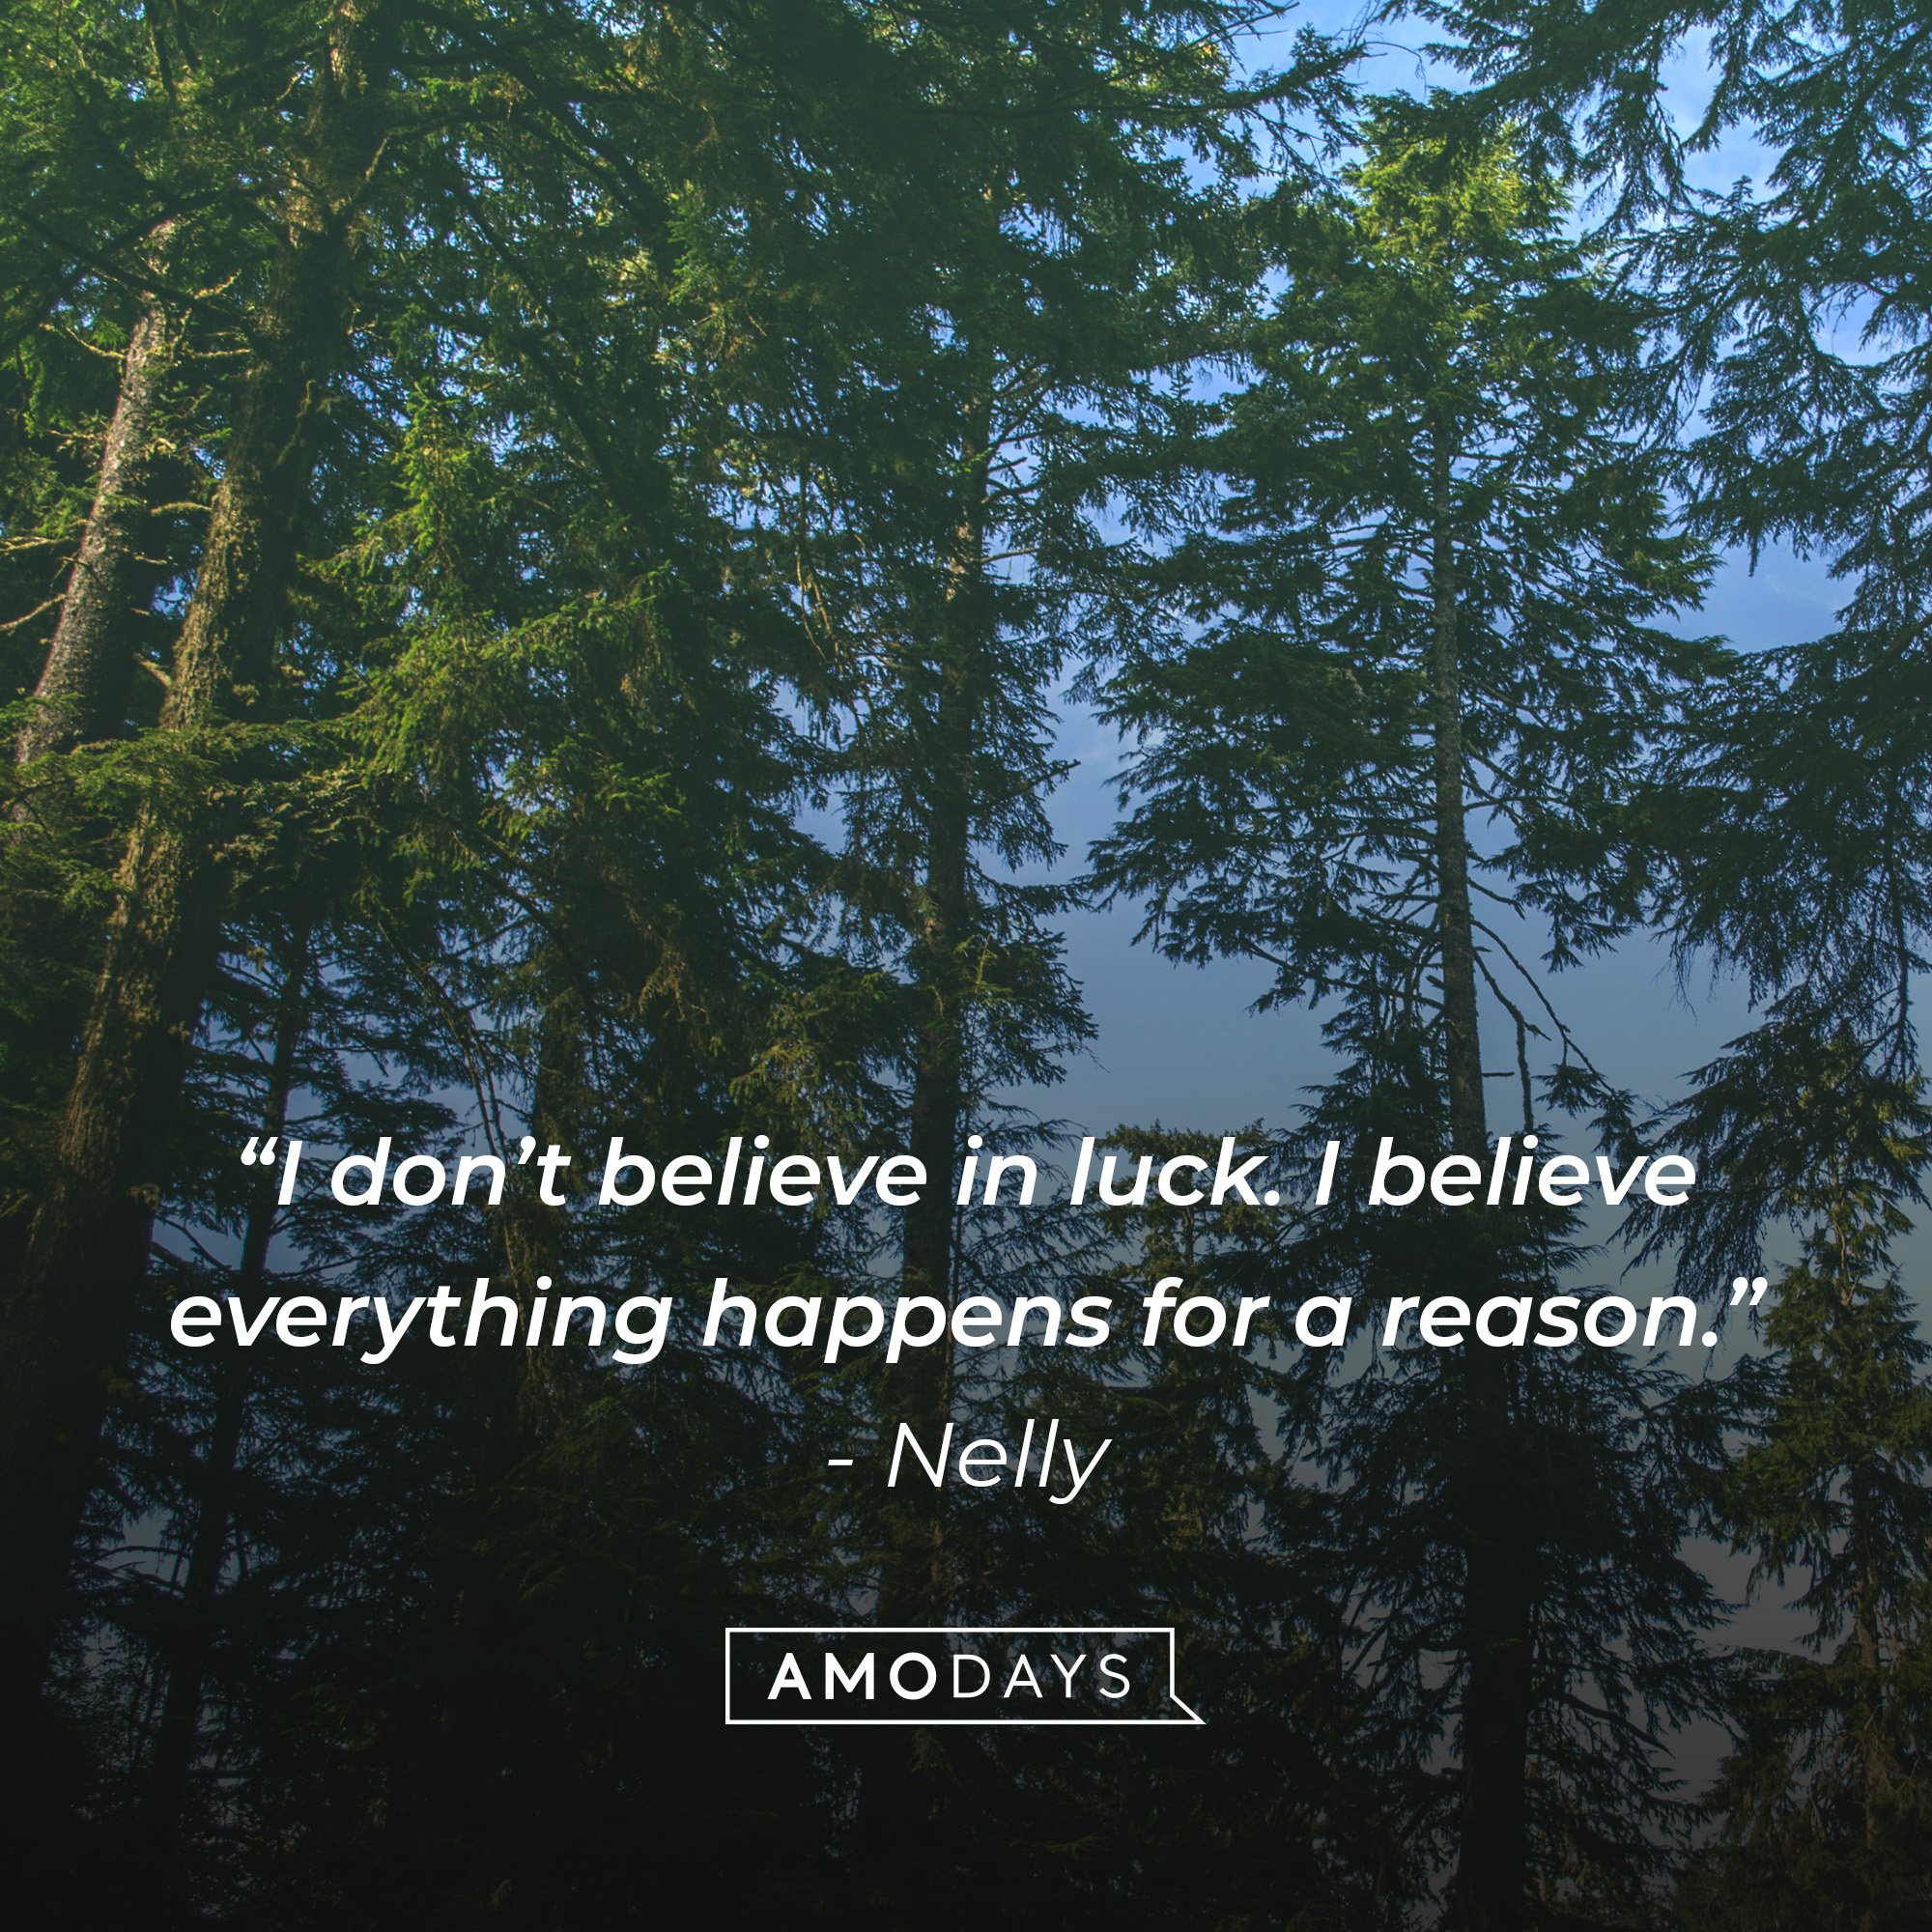 Nelly's quote: “I don’t believe in luck. I believe everything happens for a reason.” | Image: AmoDays